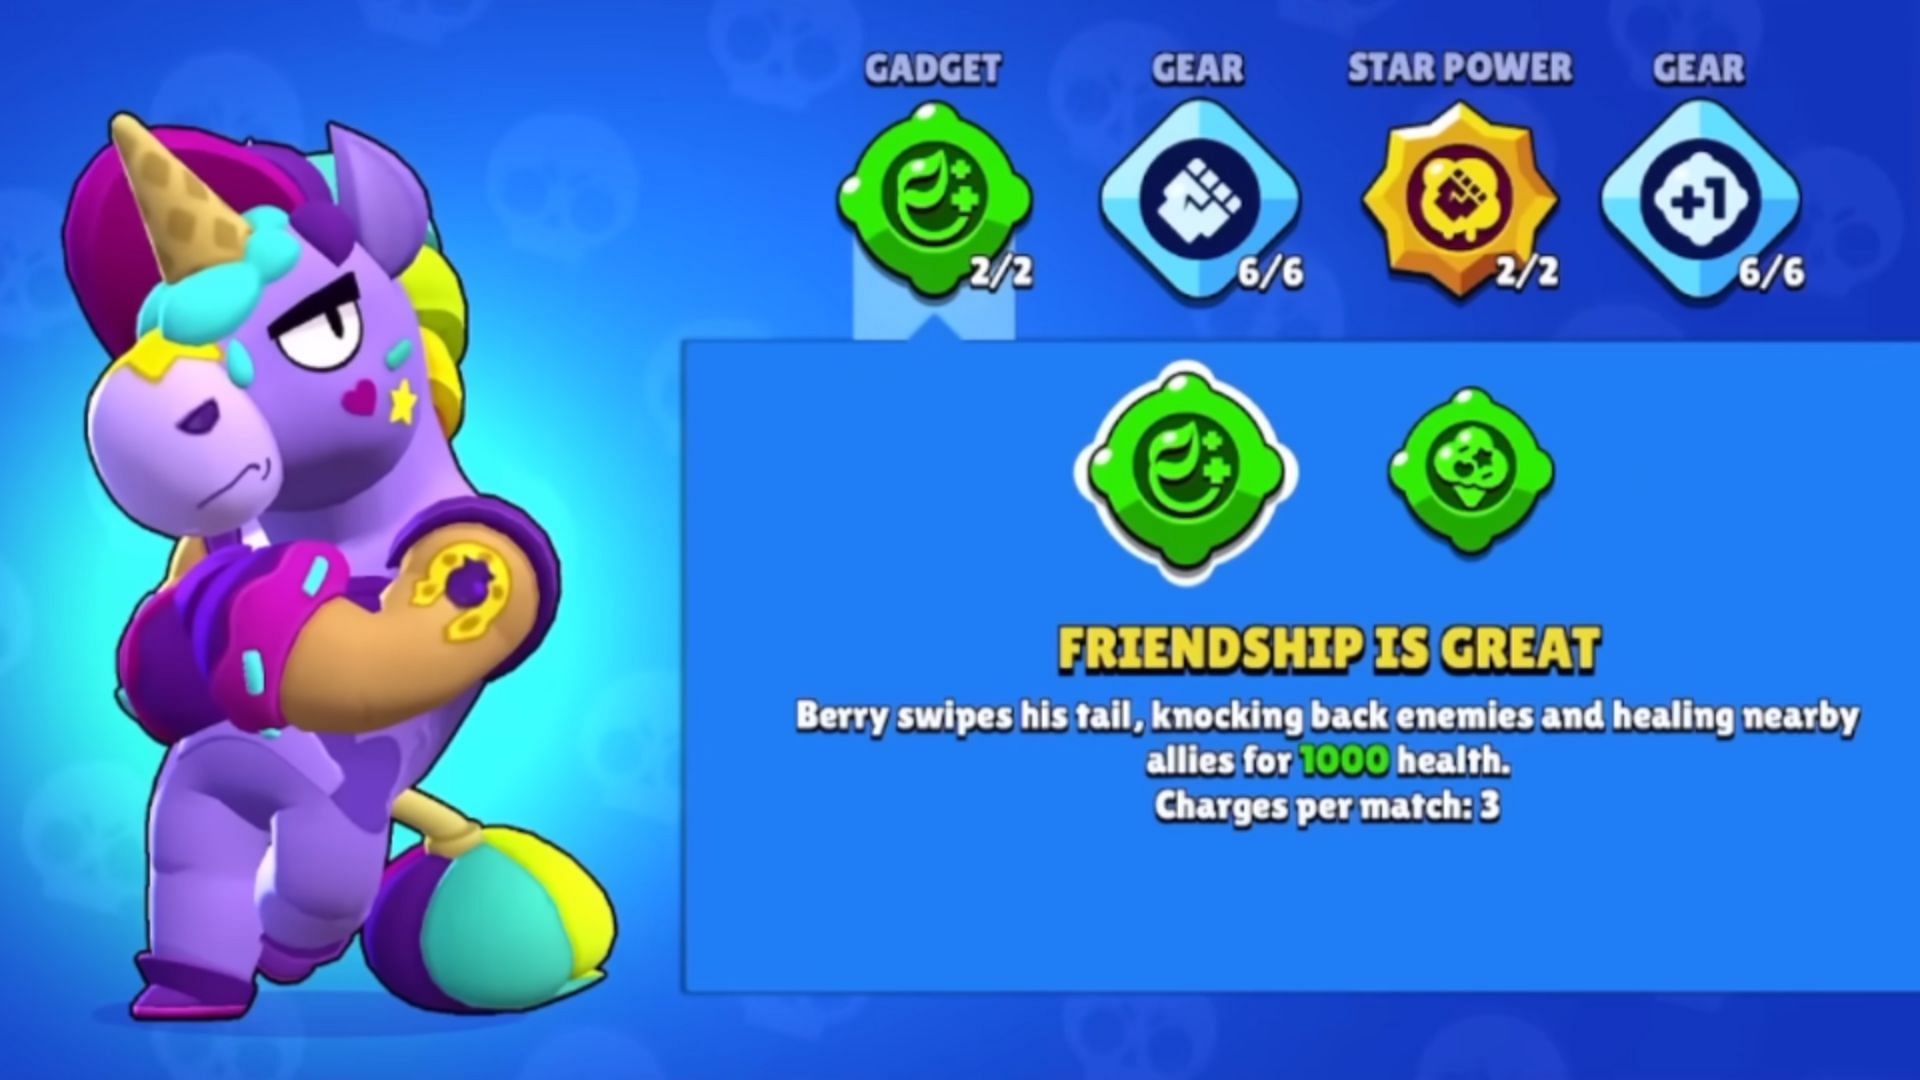 Friendship is Great Gadget (Image via Supercell)